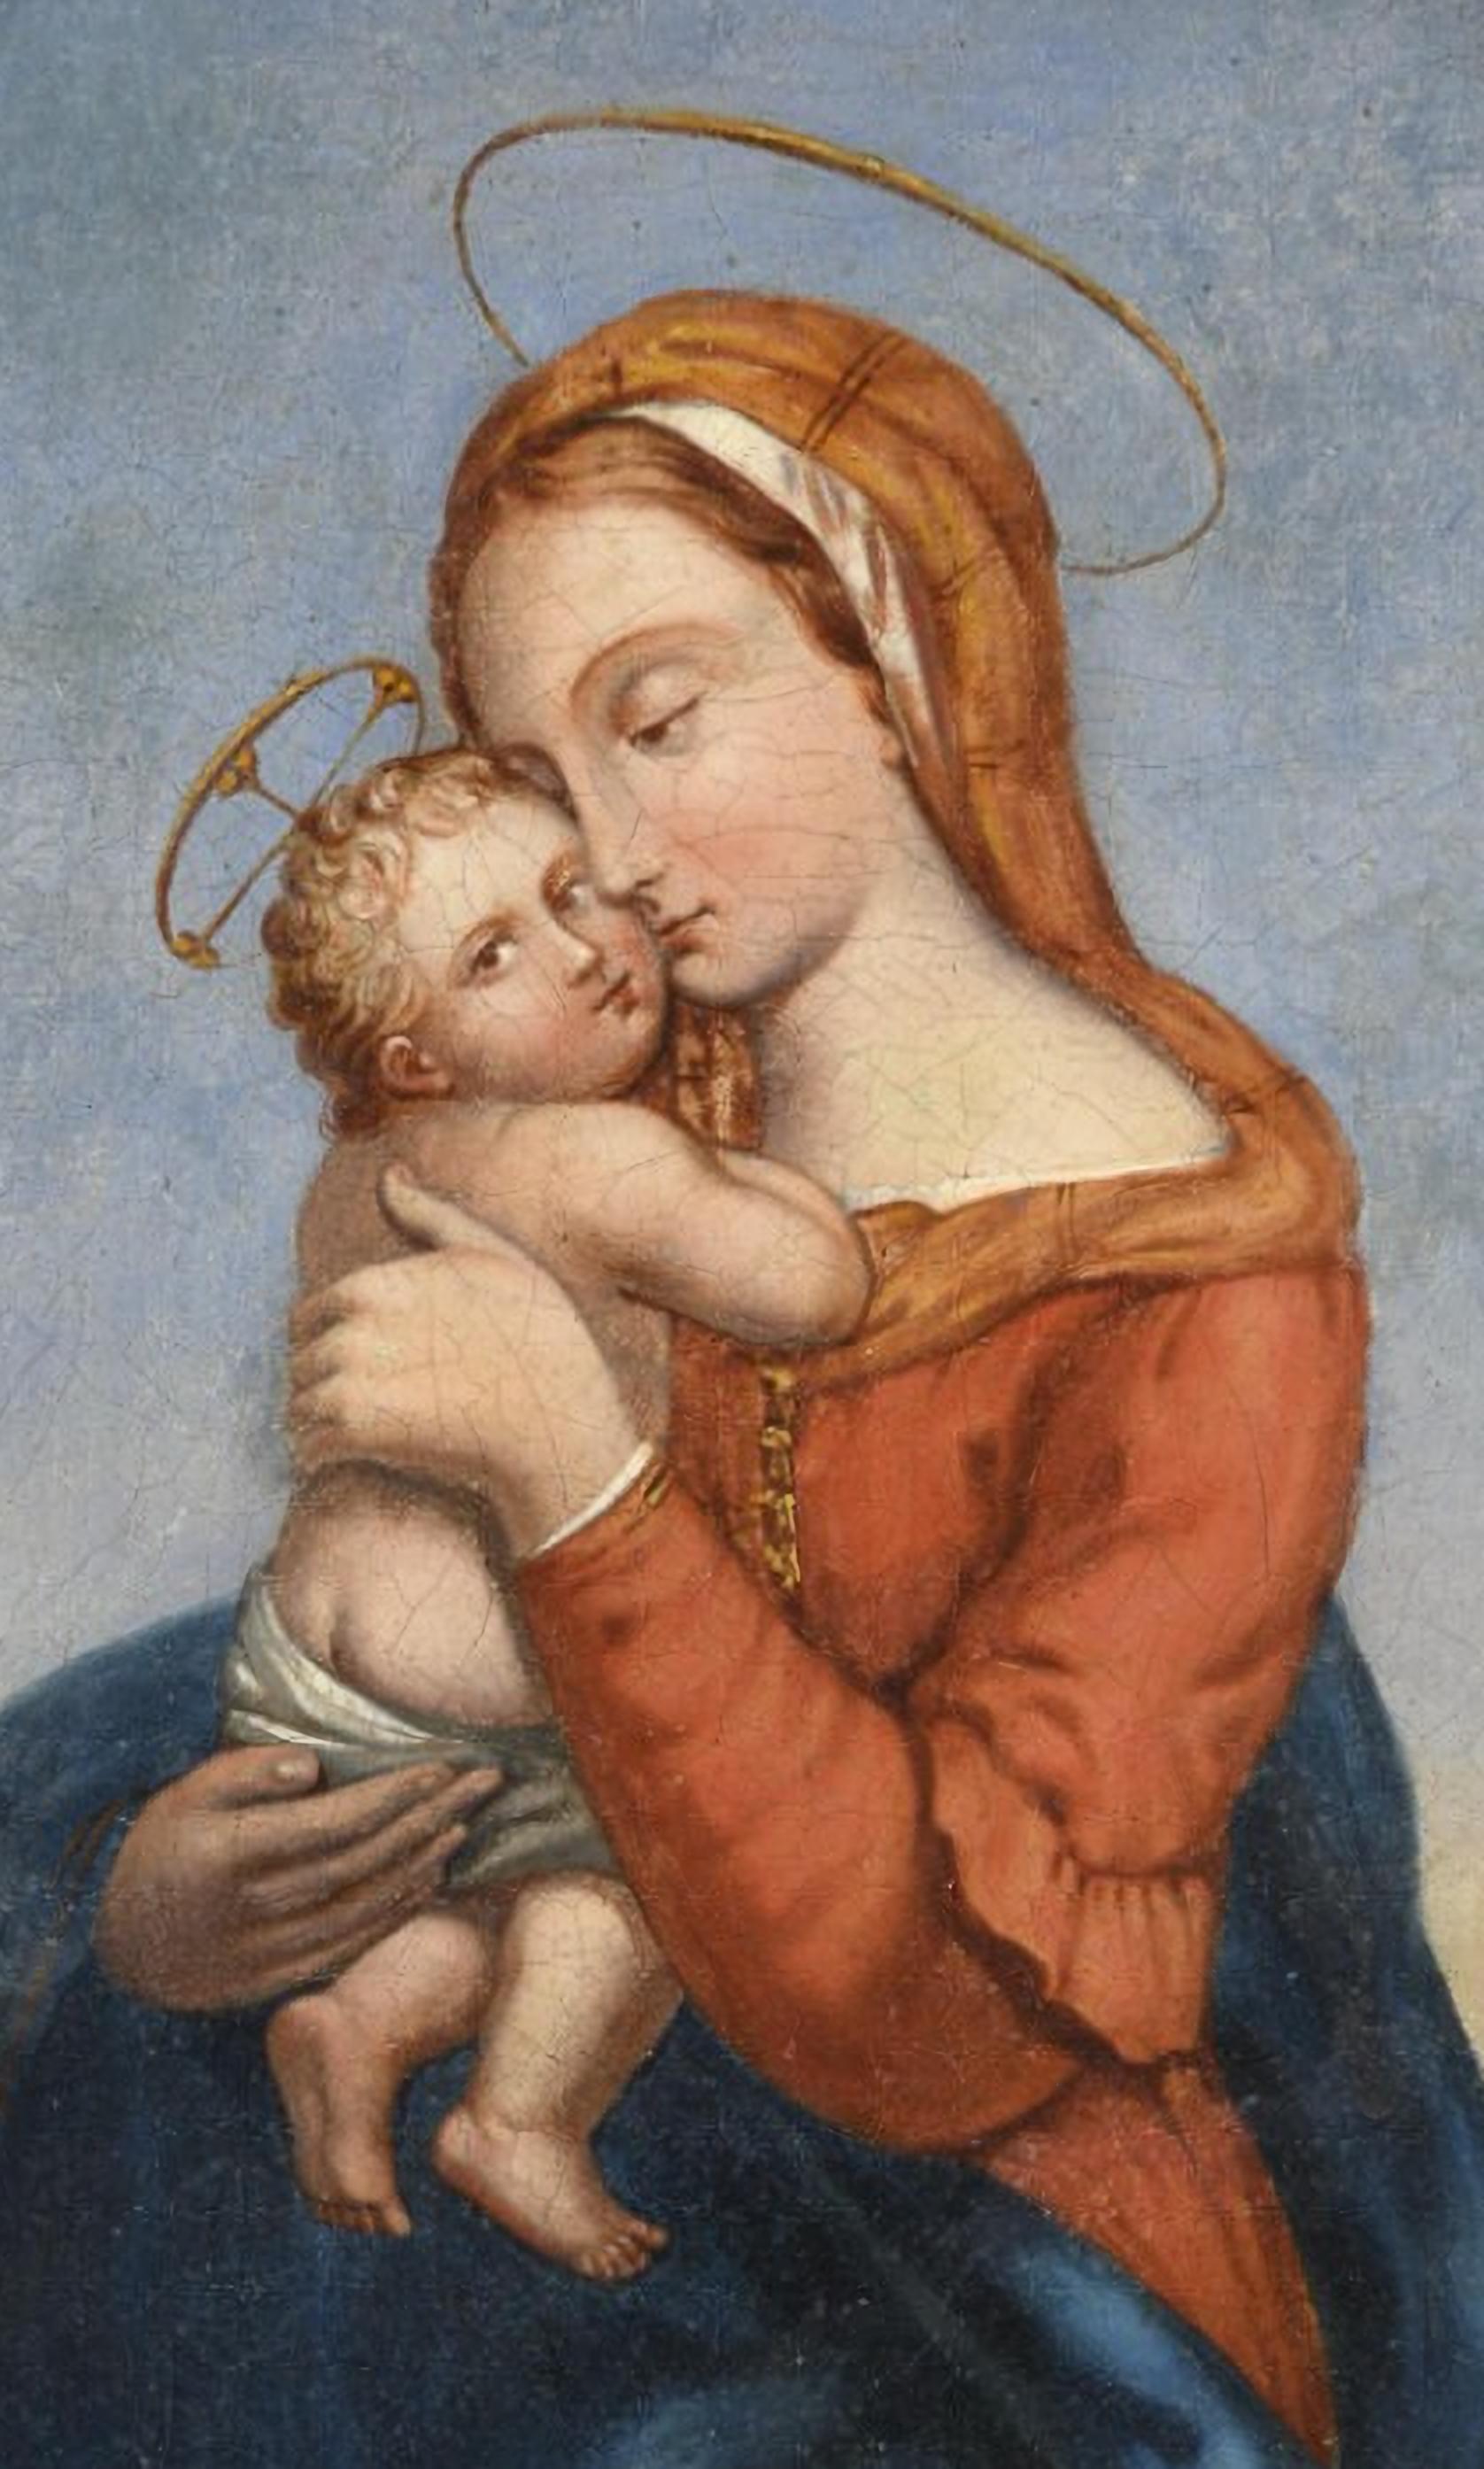 Italian School of the 18th century.

Madonna with the child
Oil on canvas with vaulted arch, cm. 49 x 38.

Condition of the painting
Renew it recently. Points of restoration scattered on the sky, on the landscape, on the blue mantle and on the